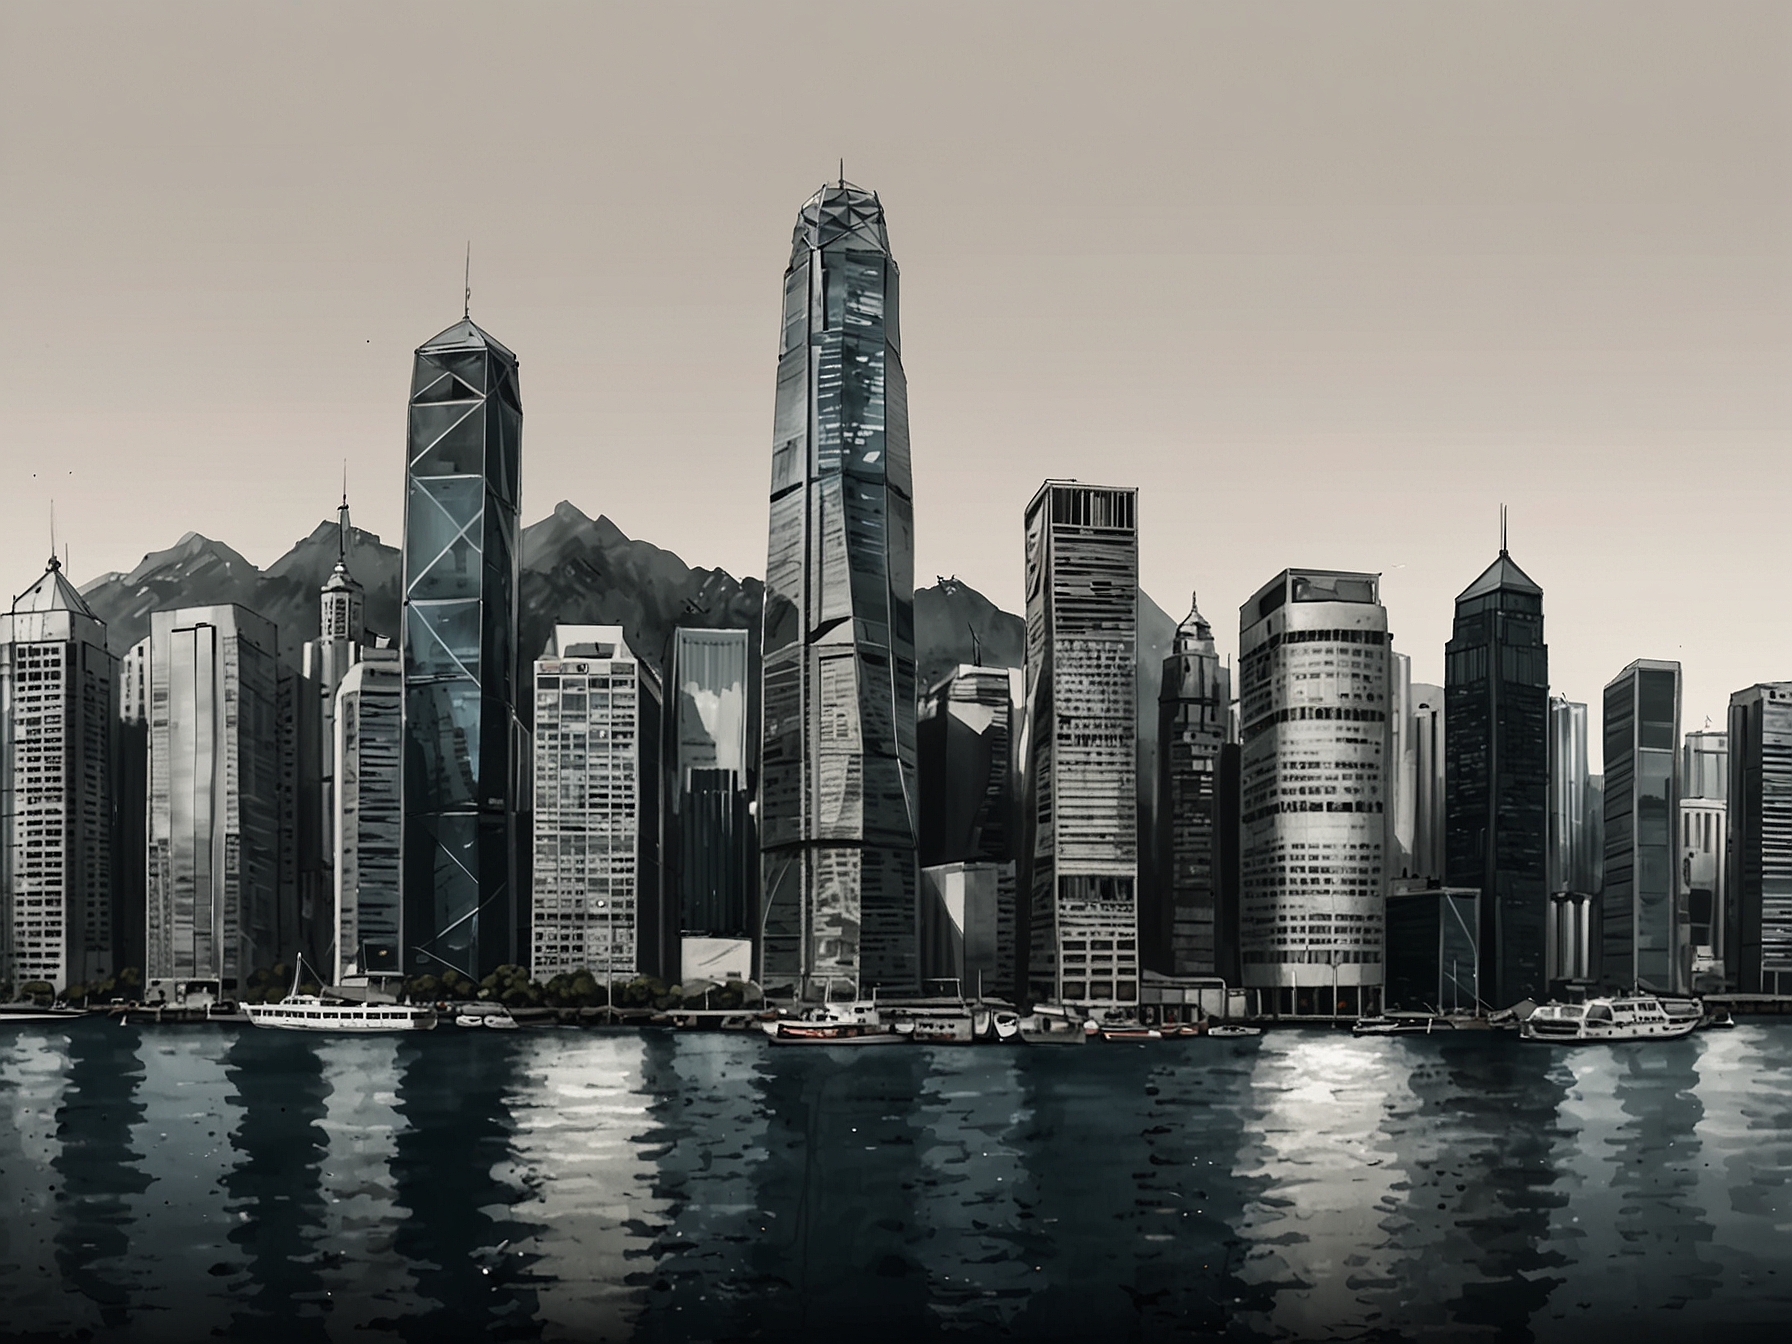 A view of the Hong Kong financial district, highlighting HKEX's headquarters. This image represents the exchange's central role in the global financial market and economic activities in the region.